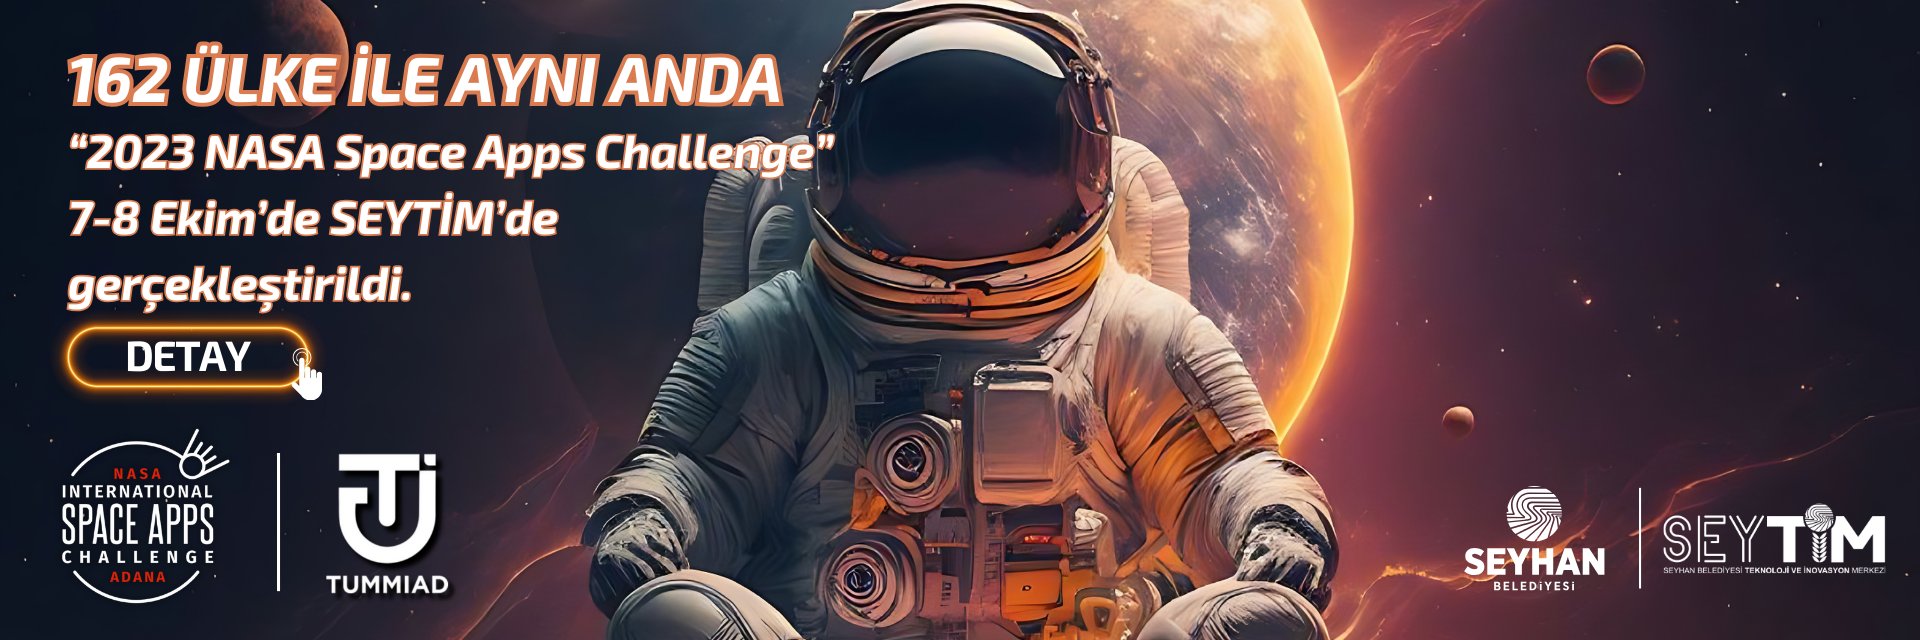 NASA SPACE APPS CHALLANGE